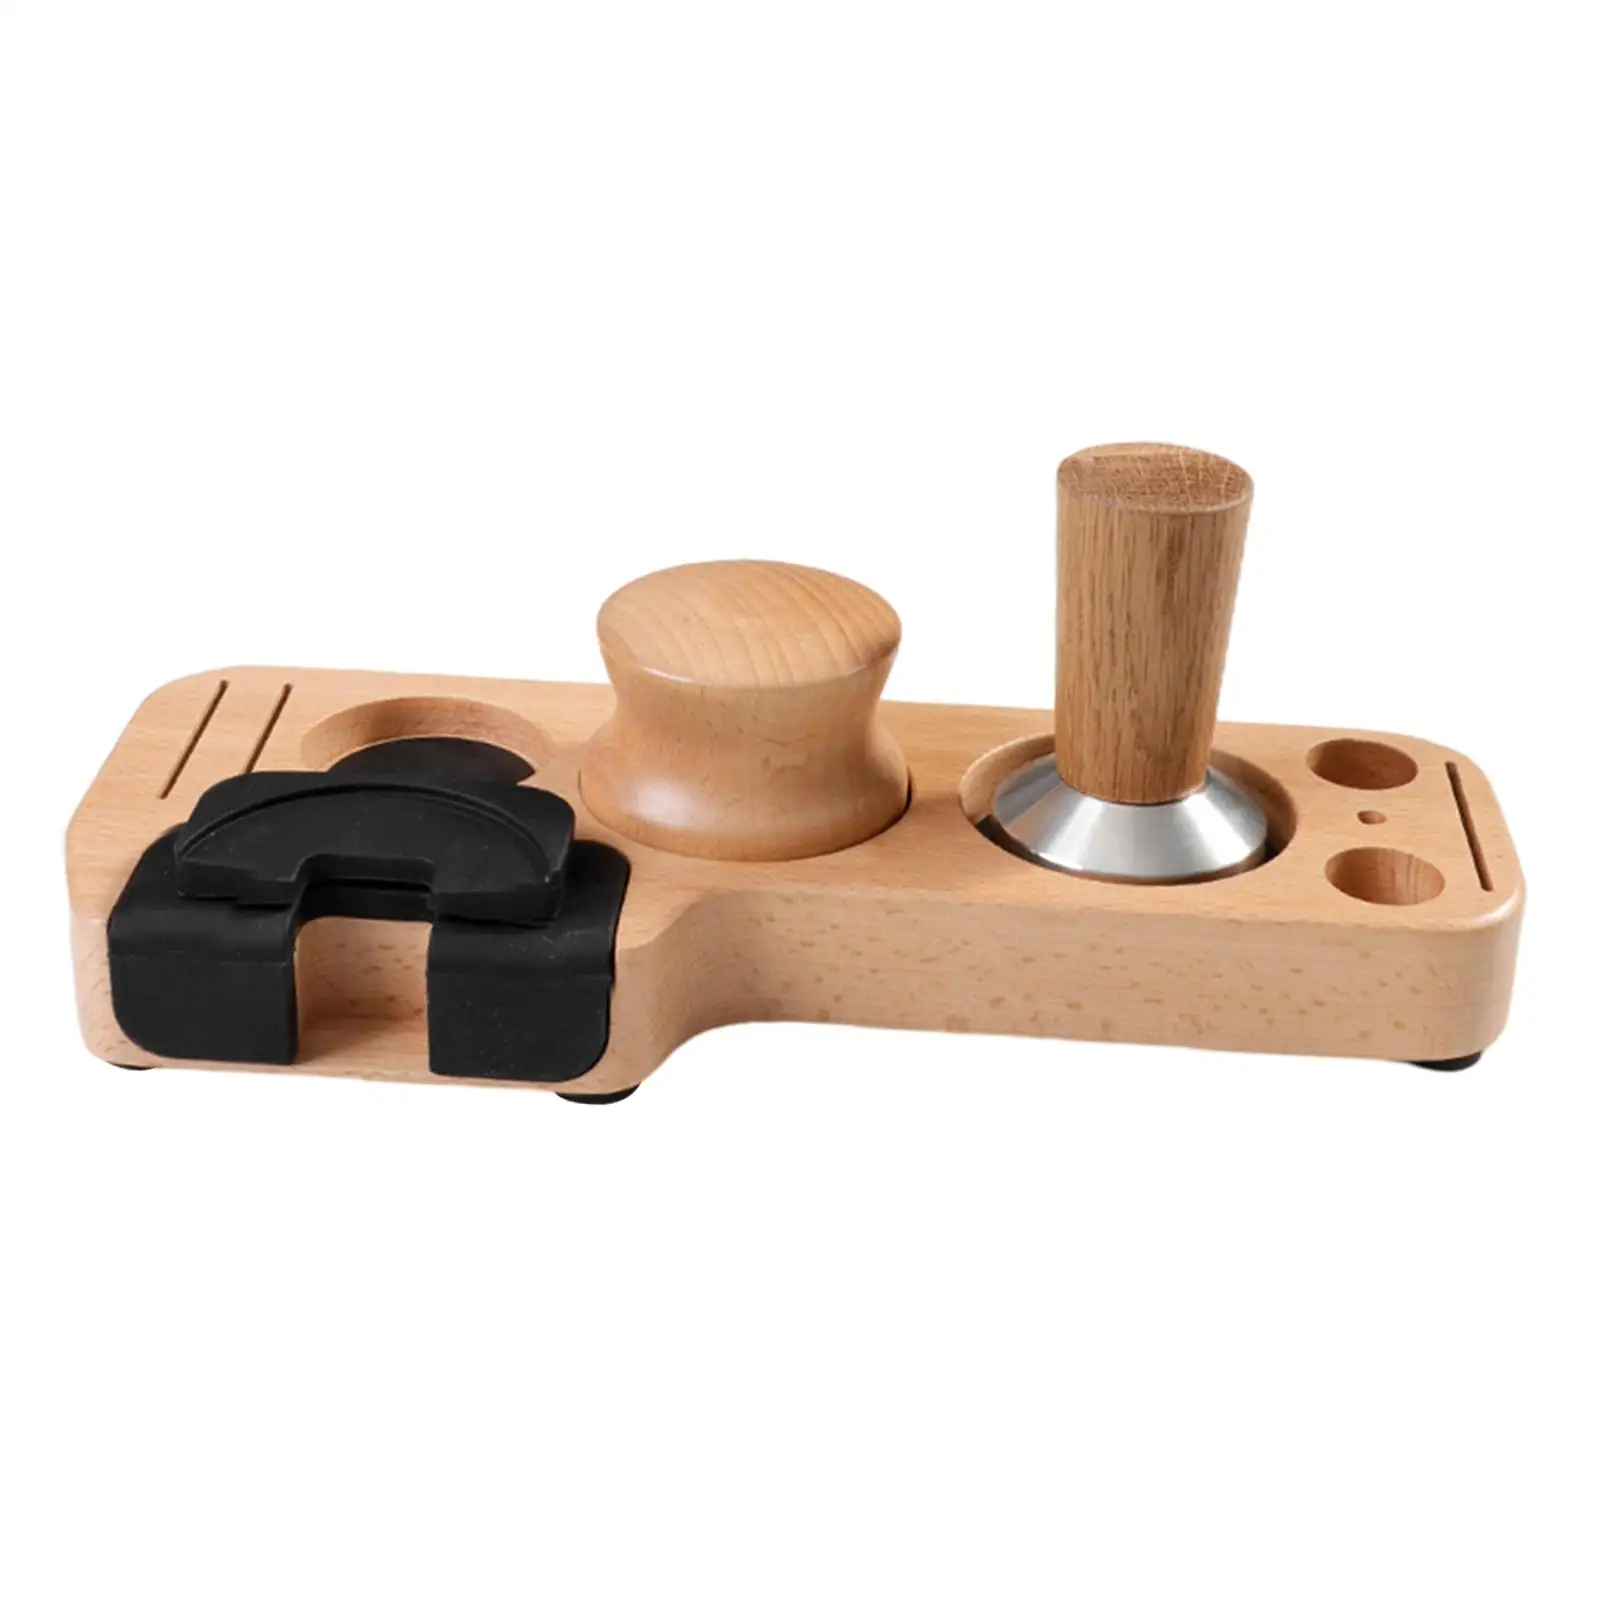 Espresso Tamping Stand Set Anti Slip Cafe Machine Supplies Wood Coffee Filter Tamper Holder Kits for Tearoom Counters Coffee Bar